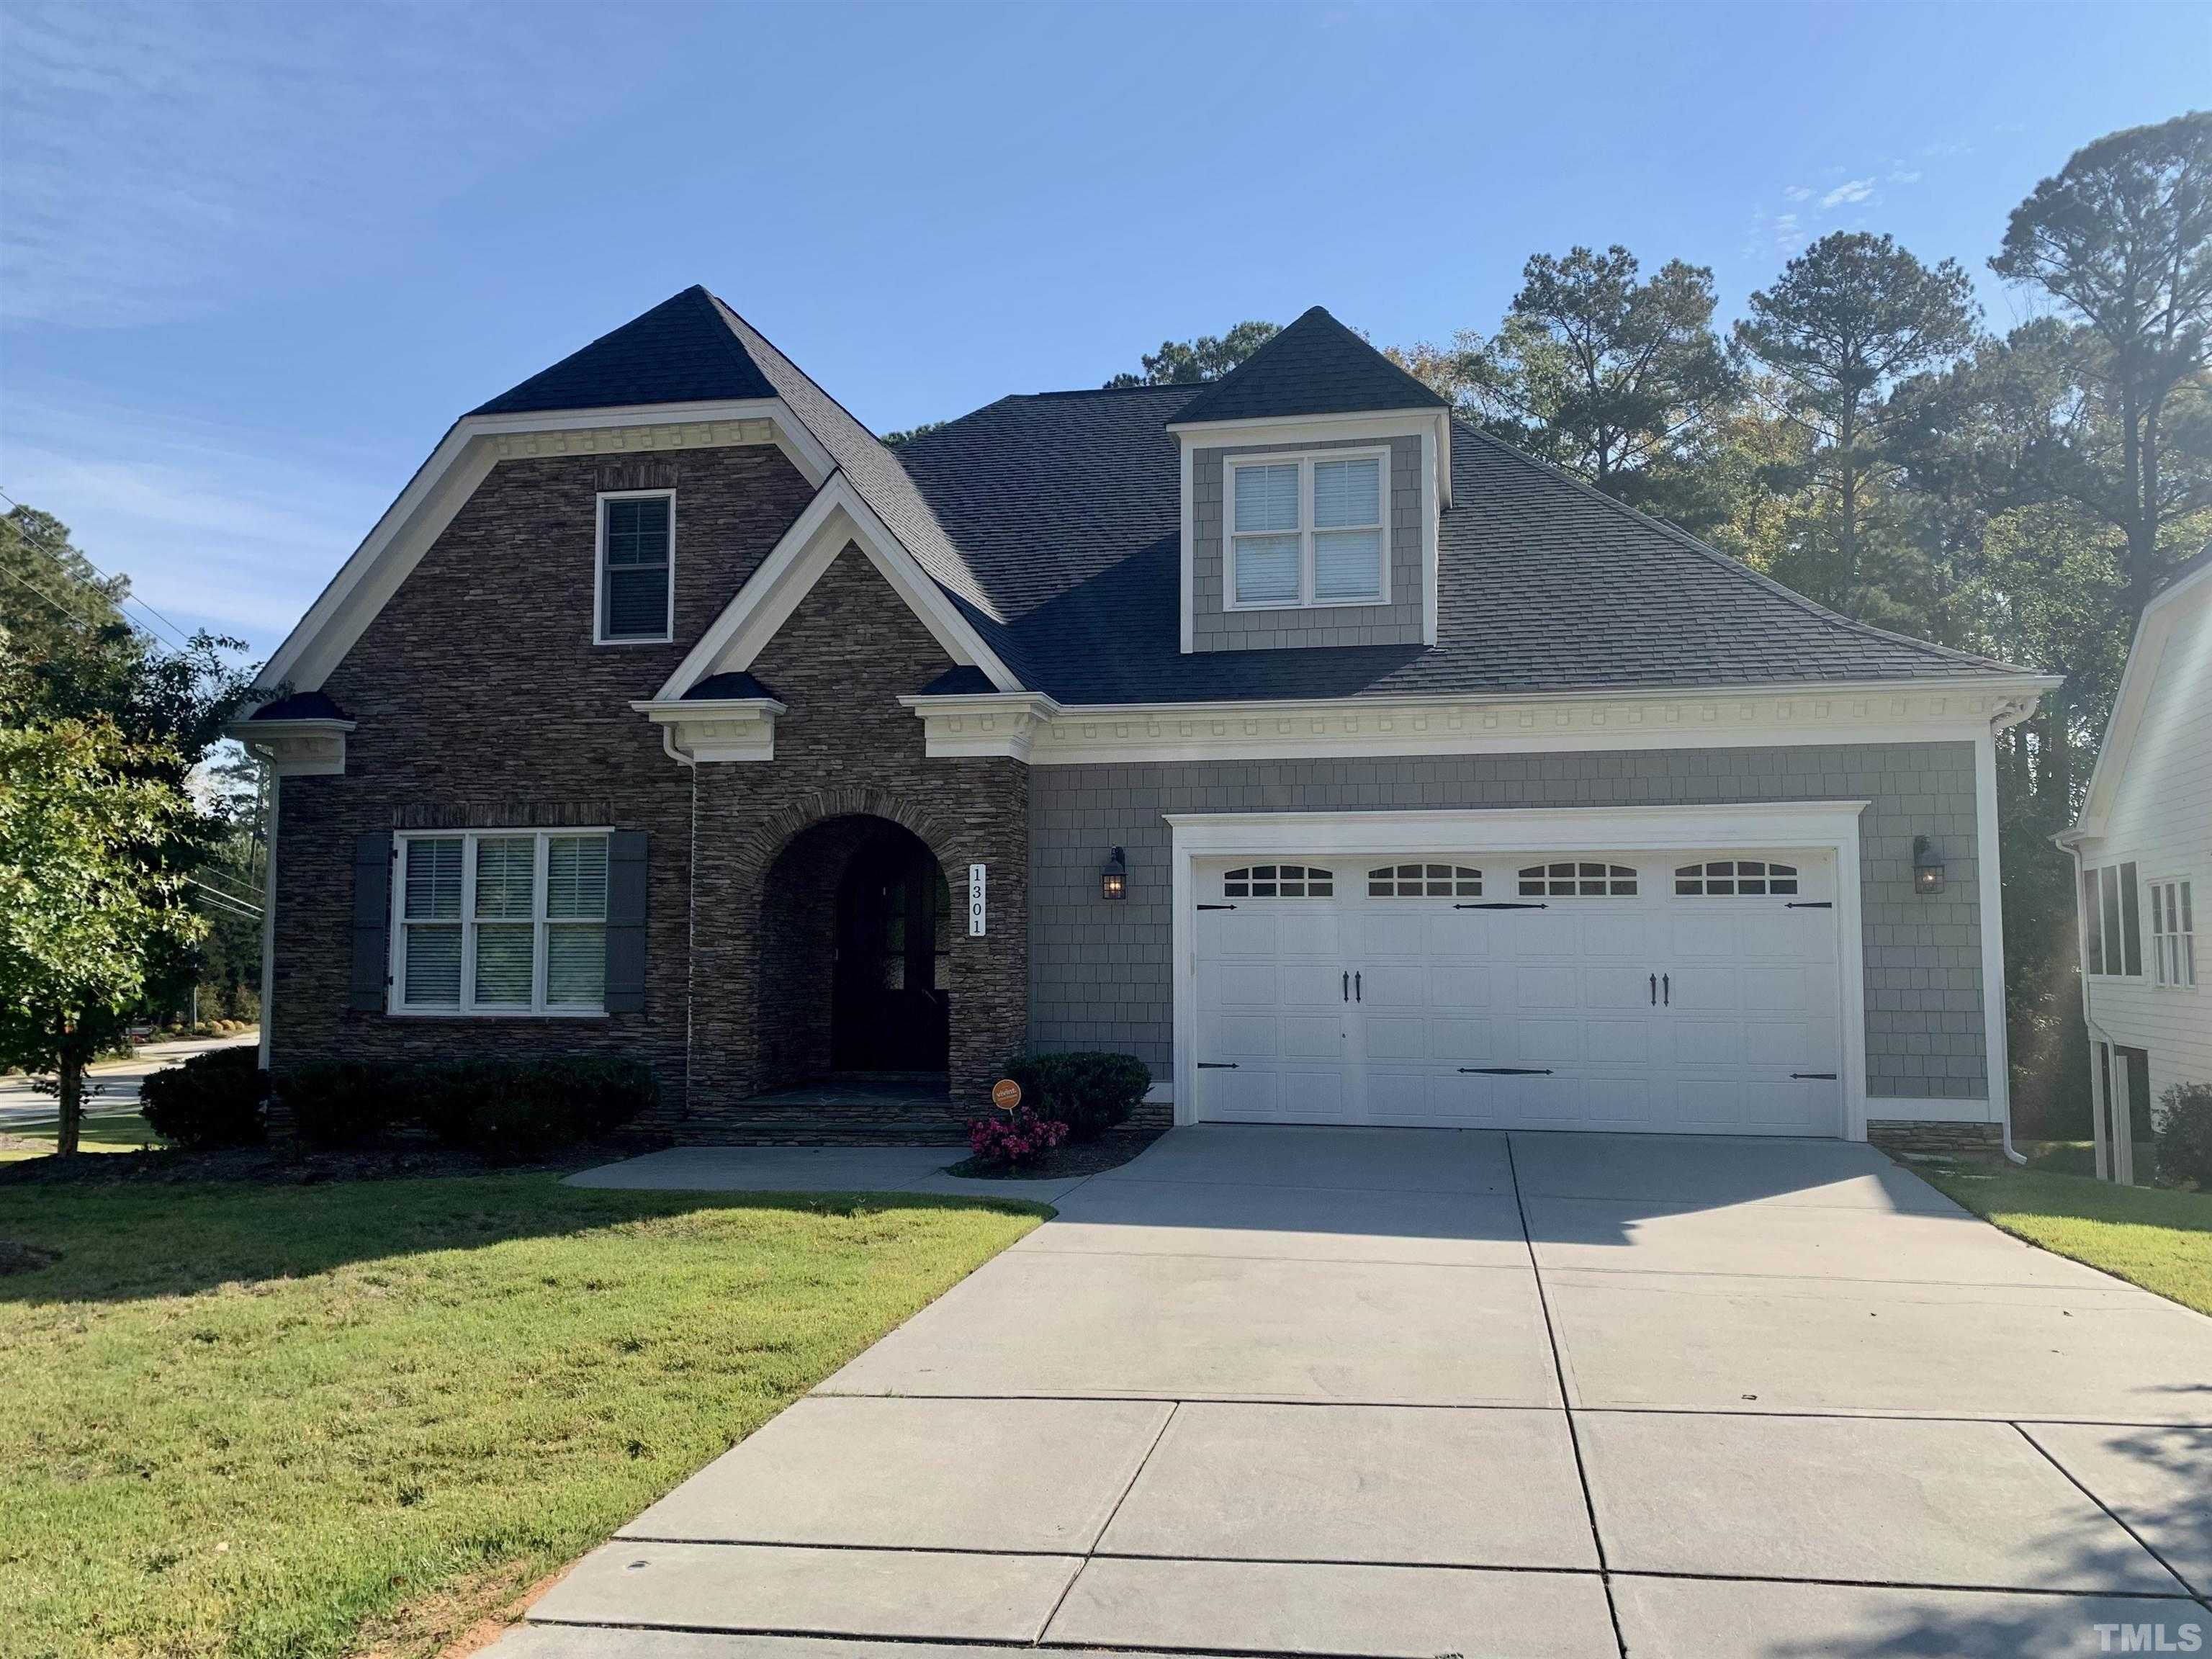 $3,295 - 3Br/4Ba -  for Sale in Edwards Creek, Apex